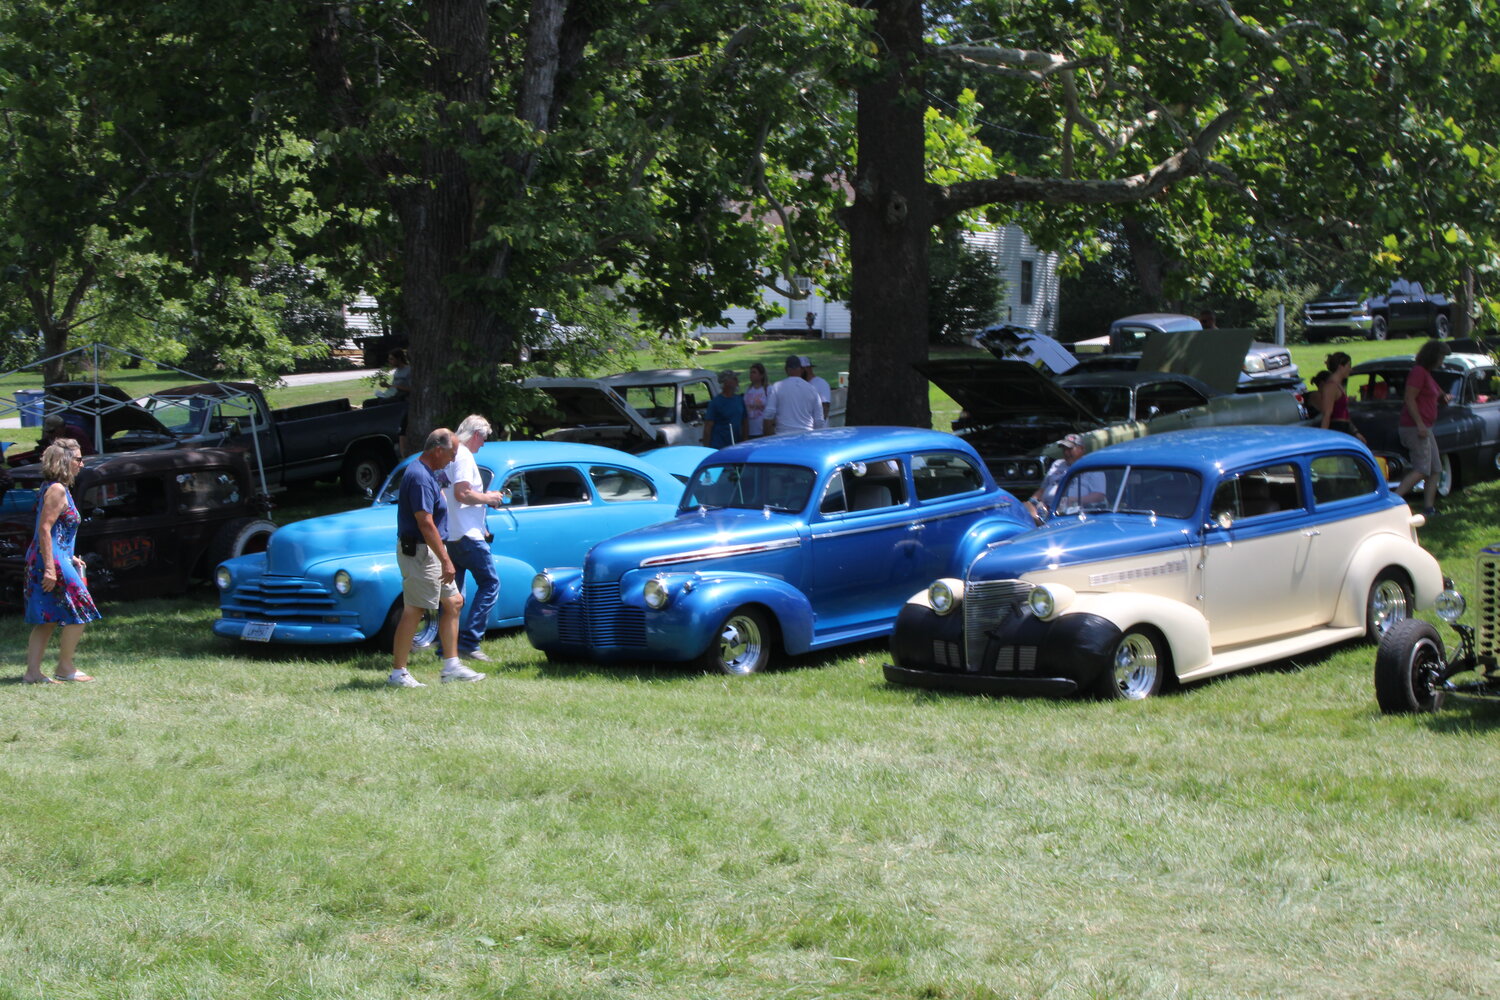 A row of blue cars were on display during the July 29 show.